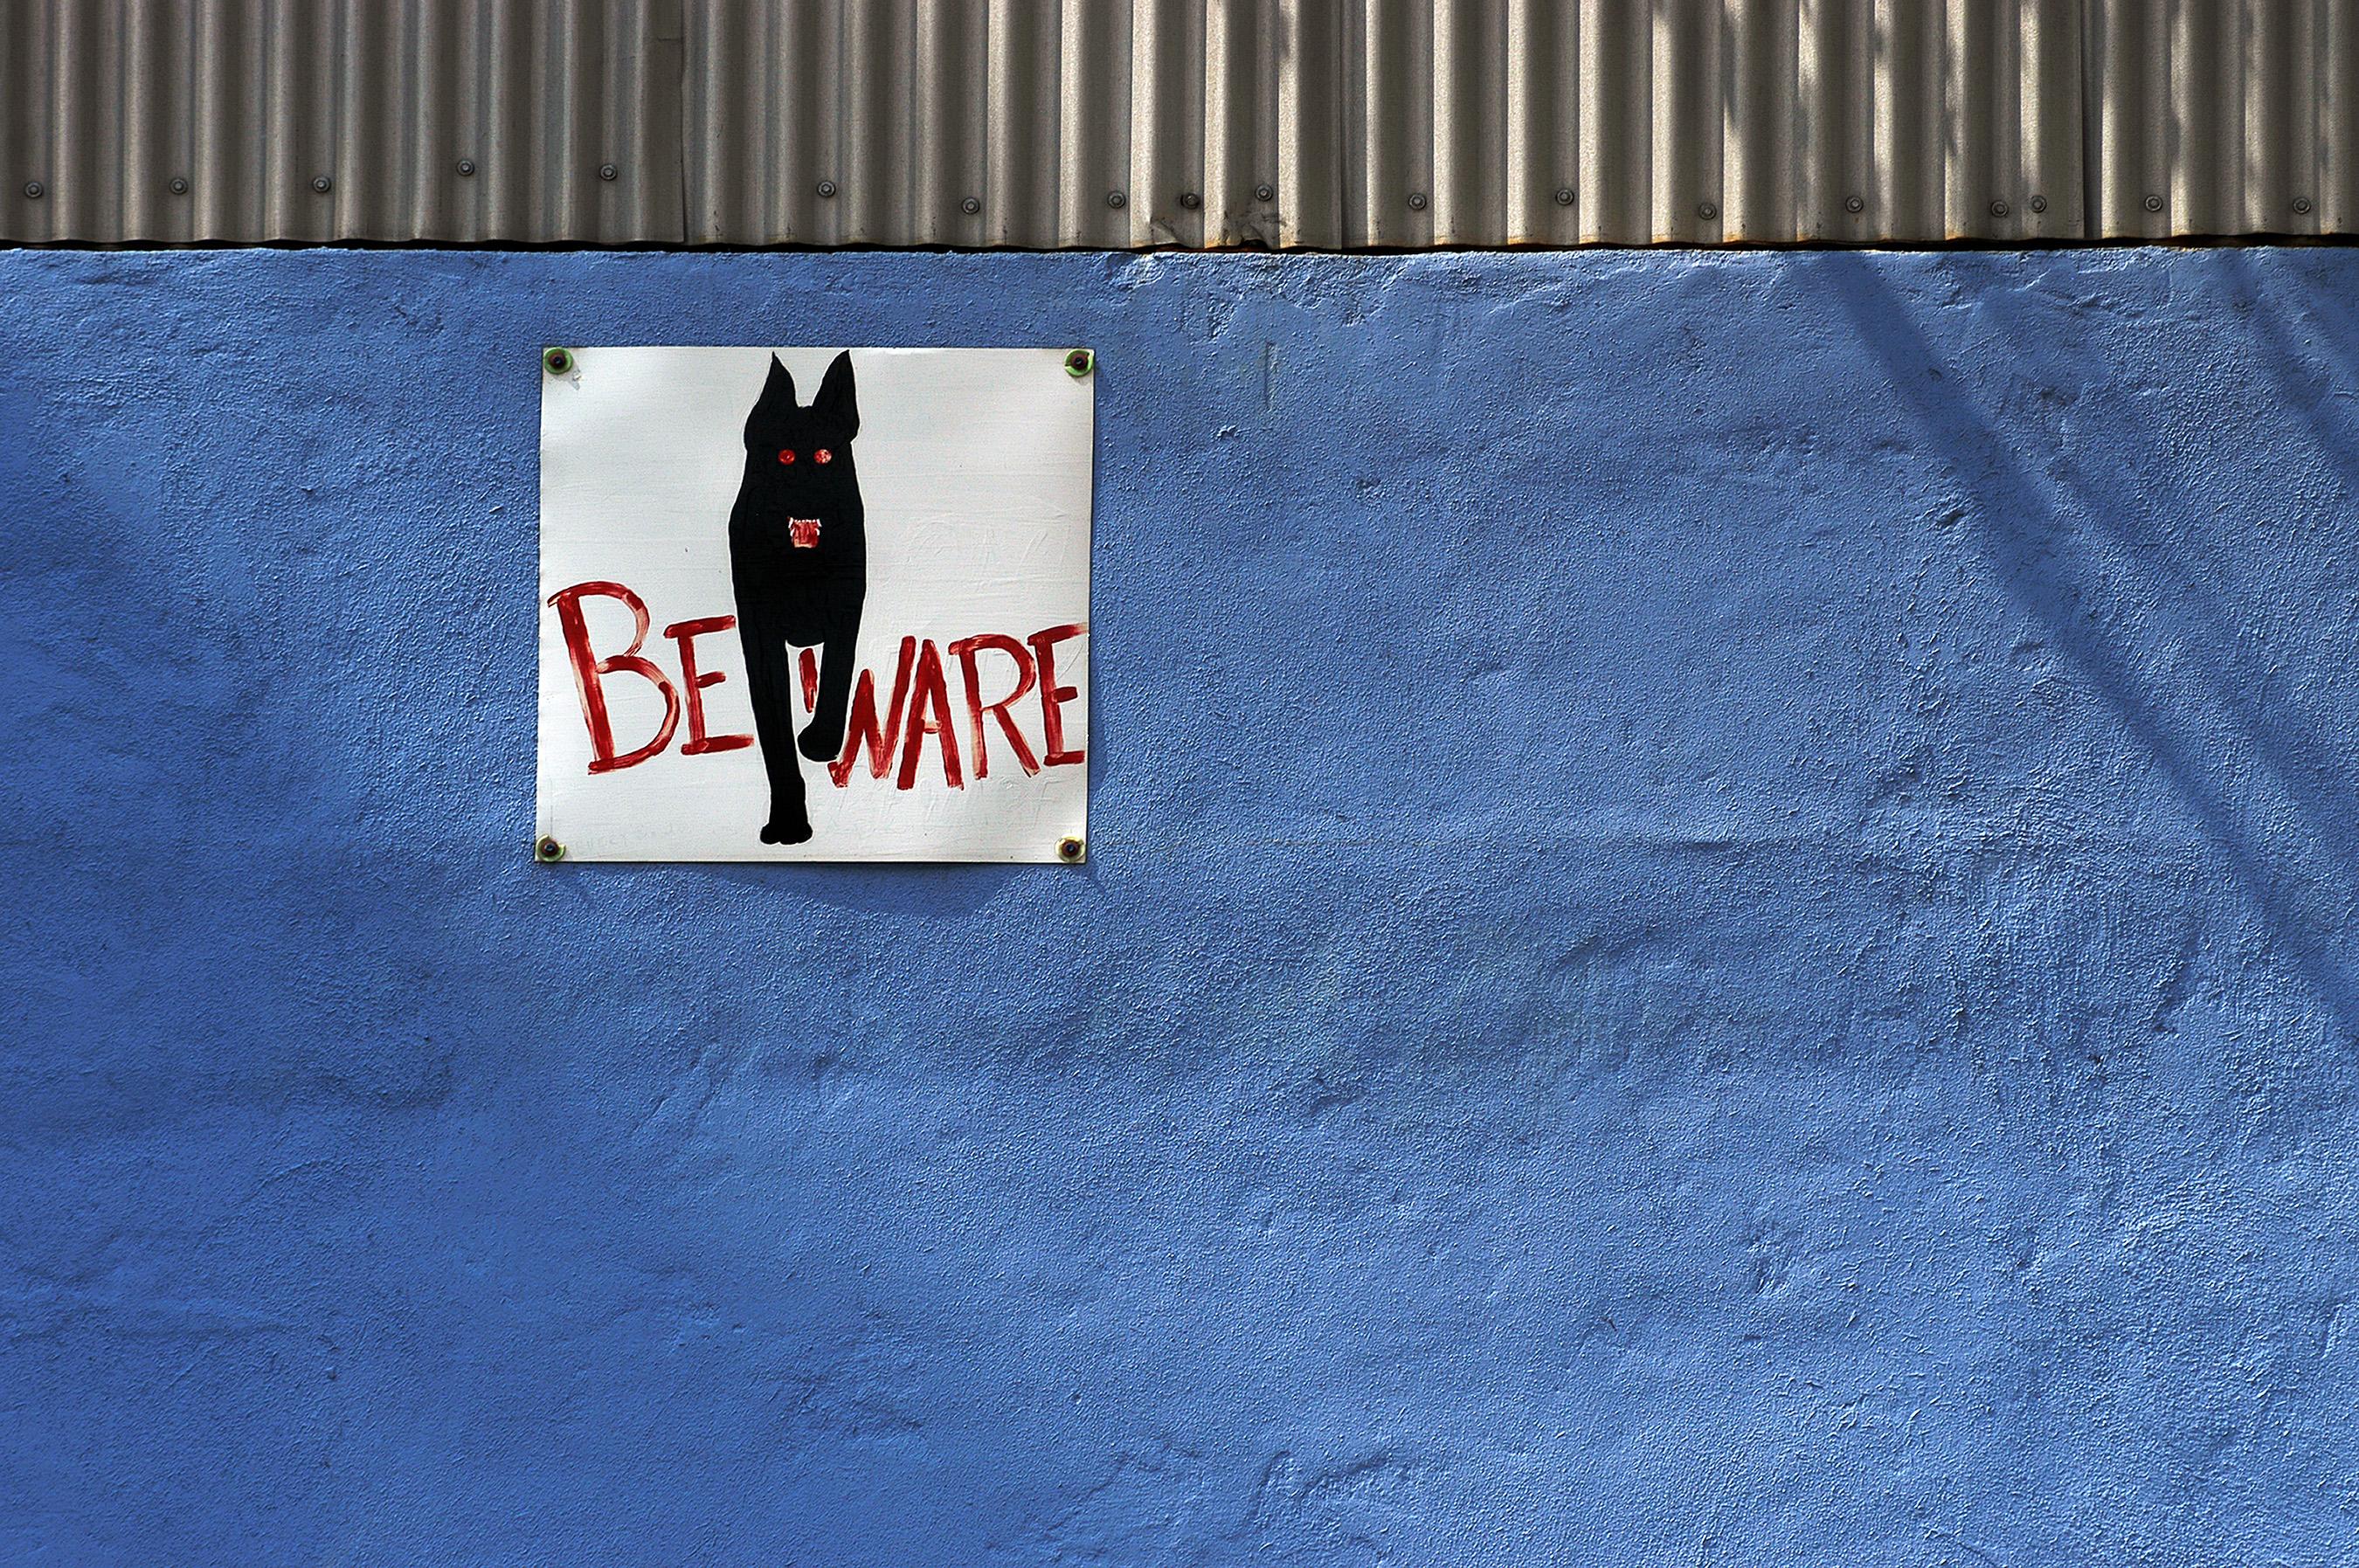 Jerry Siegel Color Photograph - "Blue (BEWARE)" - Southern Documentary Photography - Christenberry